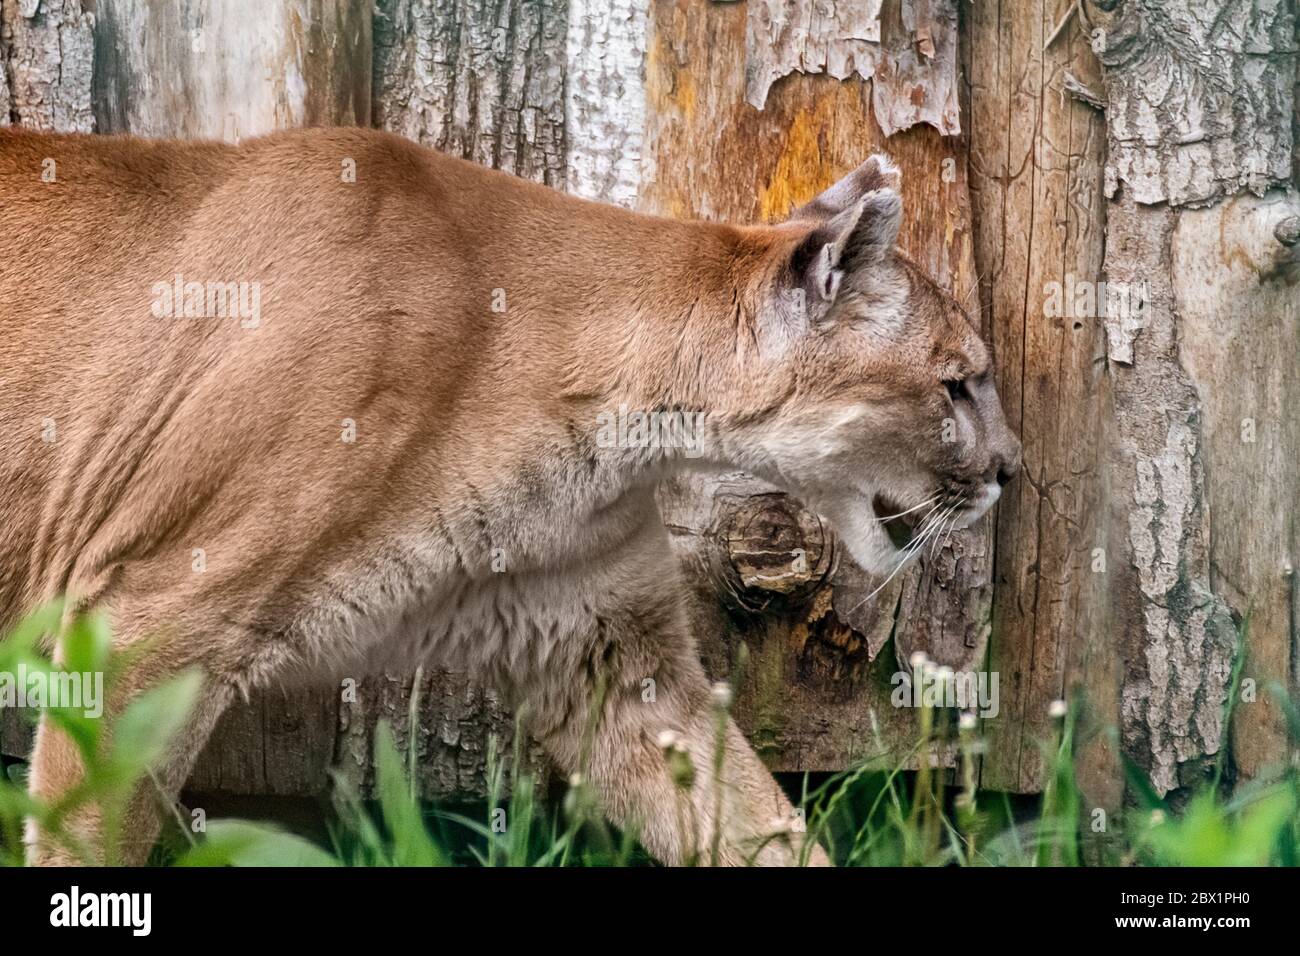 Cougar big strong wild cat animal profile walking in zoo on wooden background Stock Photo